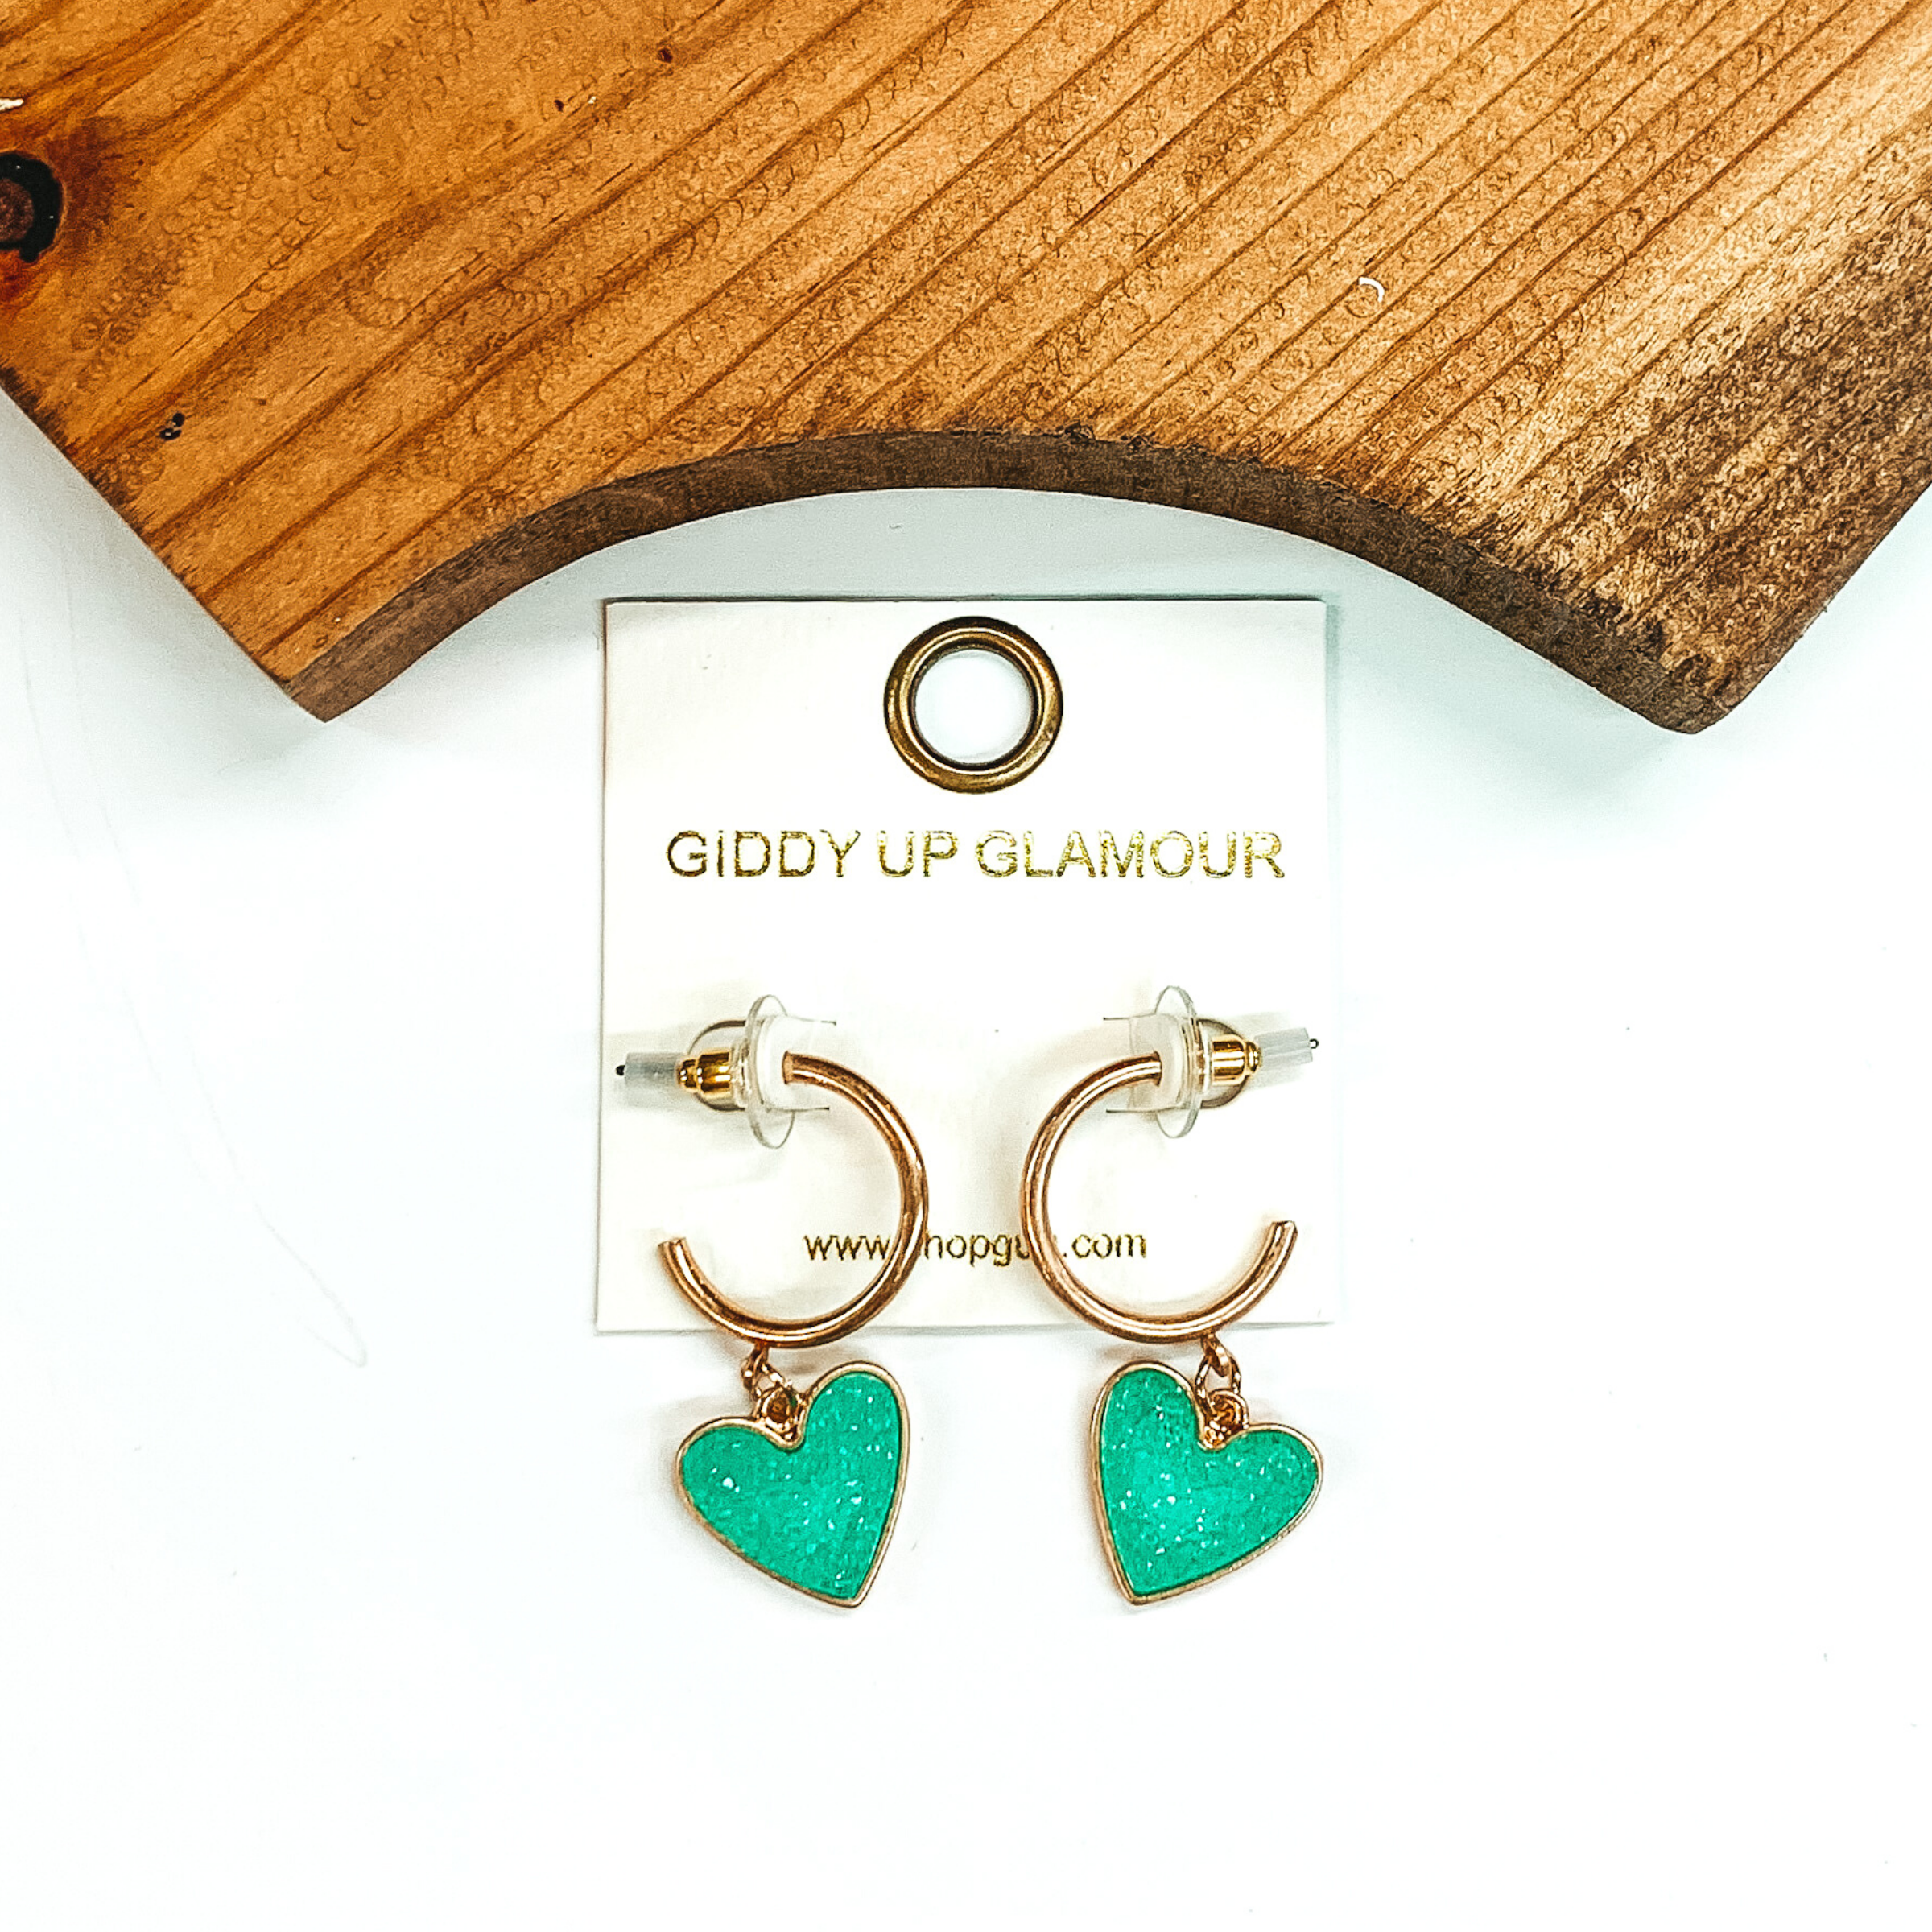 Gold hoop earrings with a mint druzy heart charm at the bottom of the hoop. These earring are pictured on a white background with a piece of wood pictured at the top of the picture.